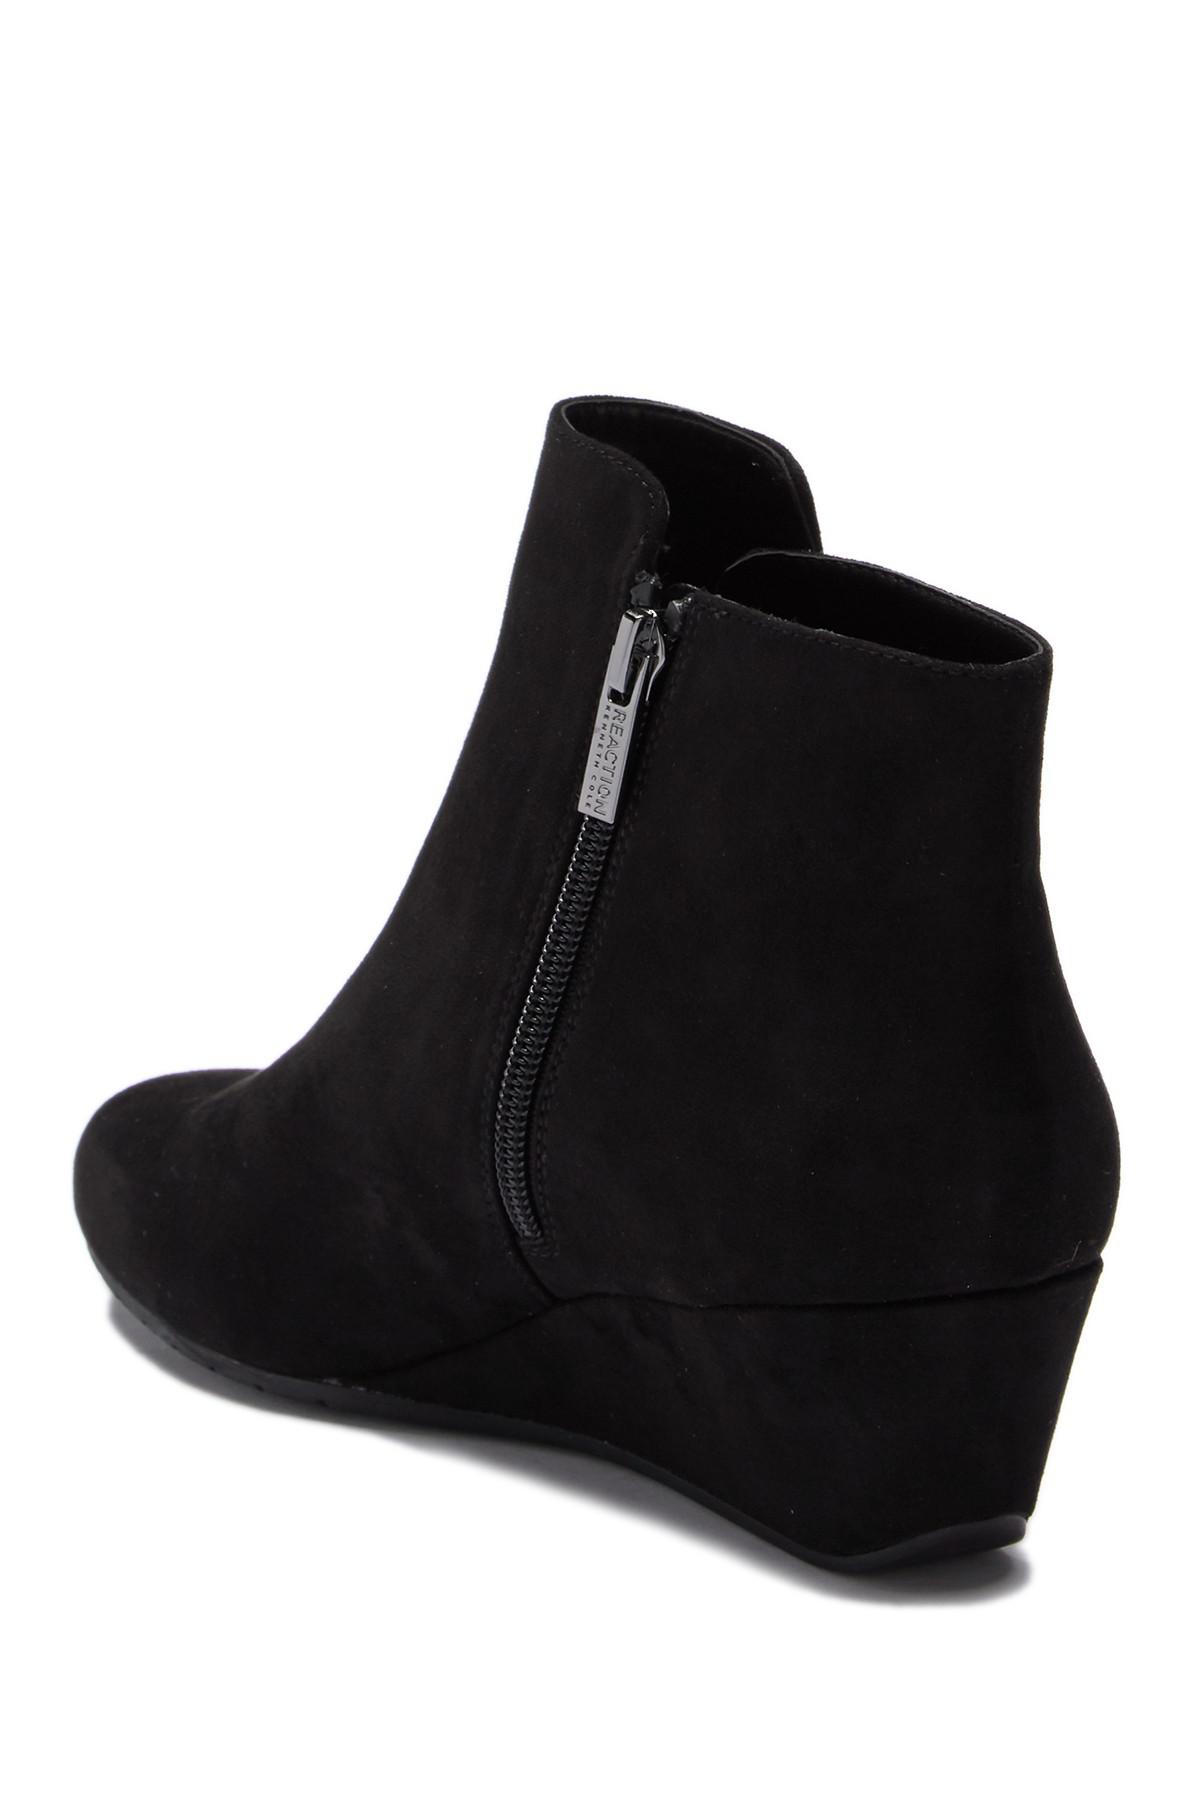 Kenneth Cole Reaction Tip Plain Wedge 